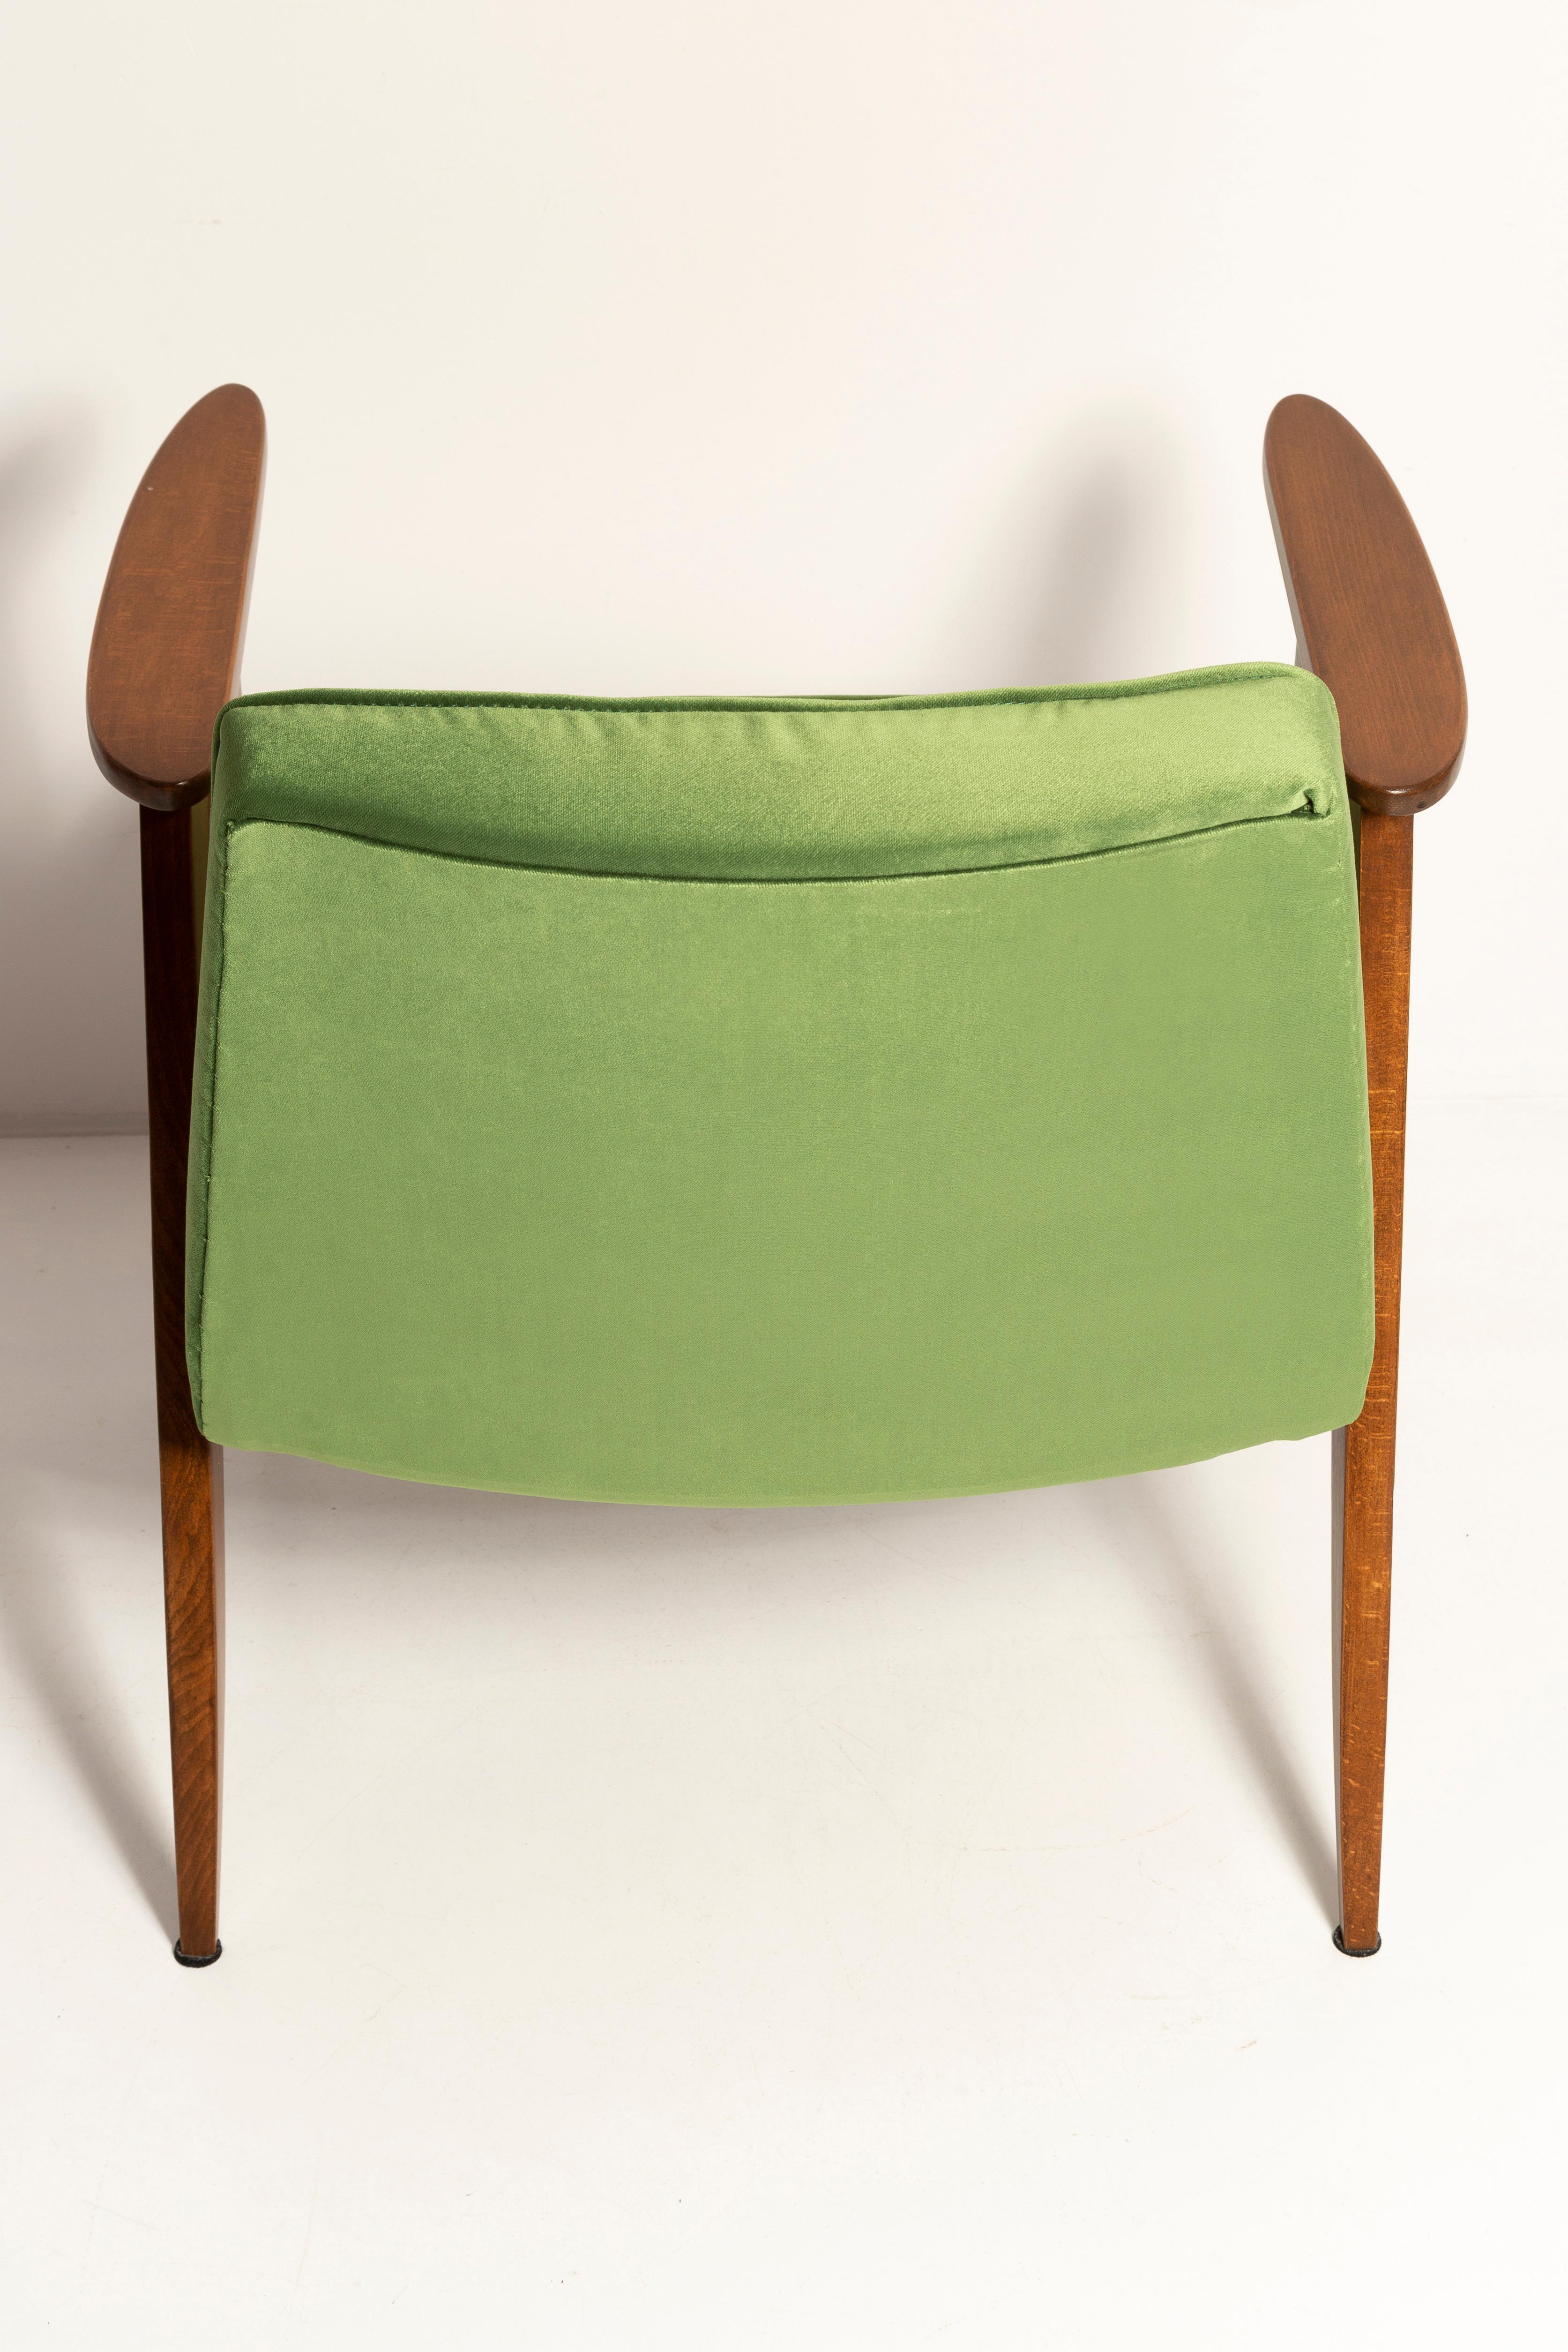 20th Century Mid Century 366 Armchair in Green Velvet, by Jozef Chierowski, Europe, 1960s For Sale